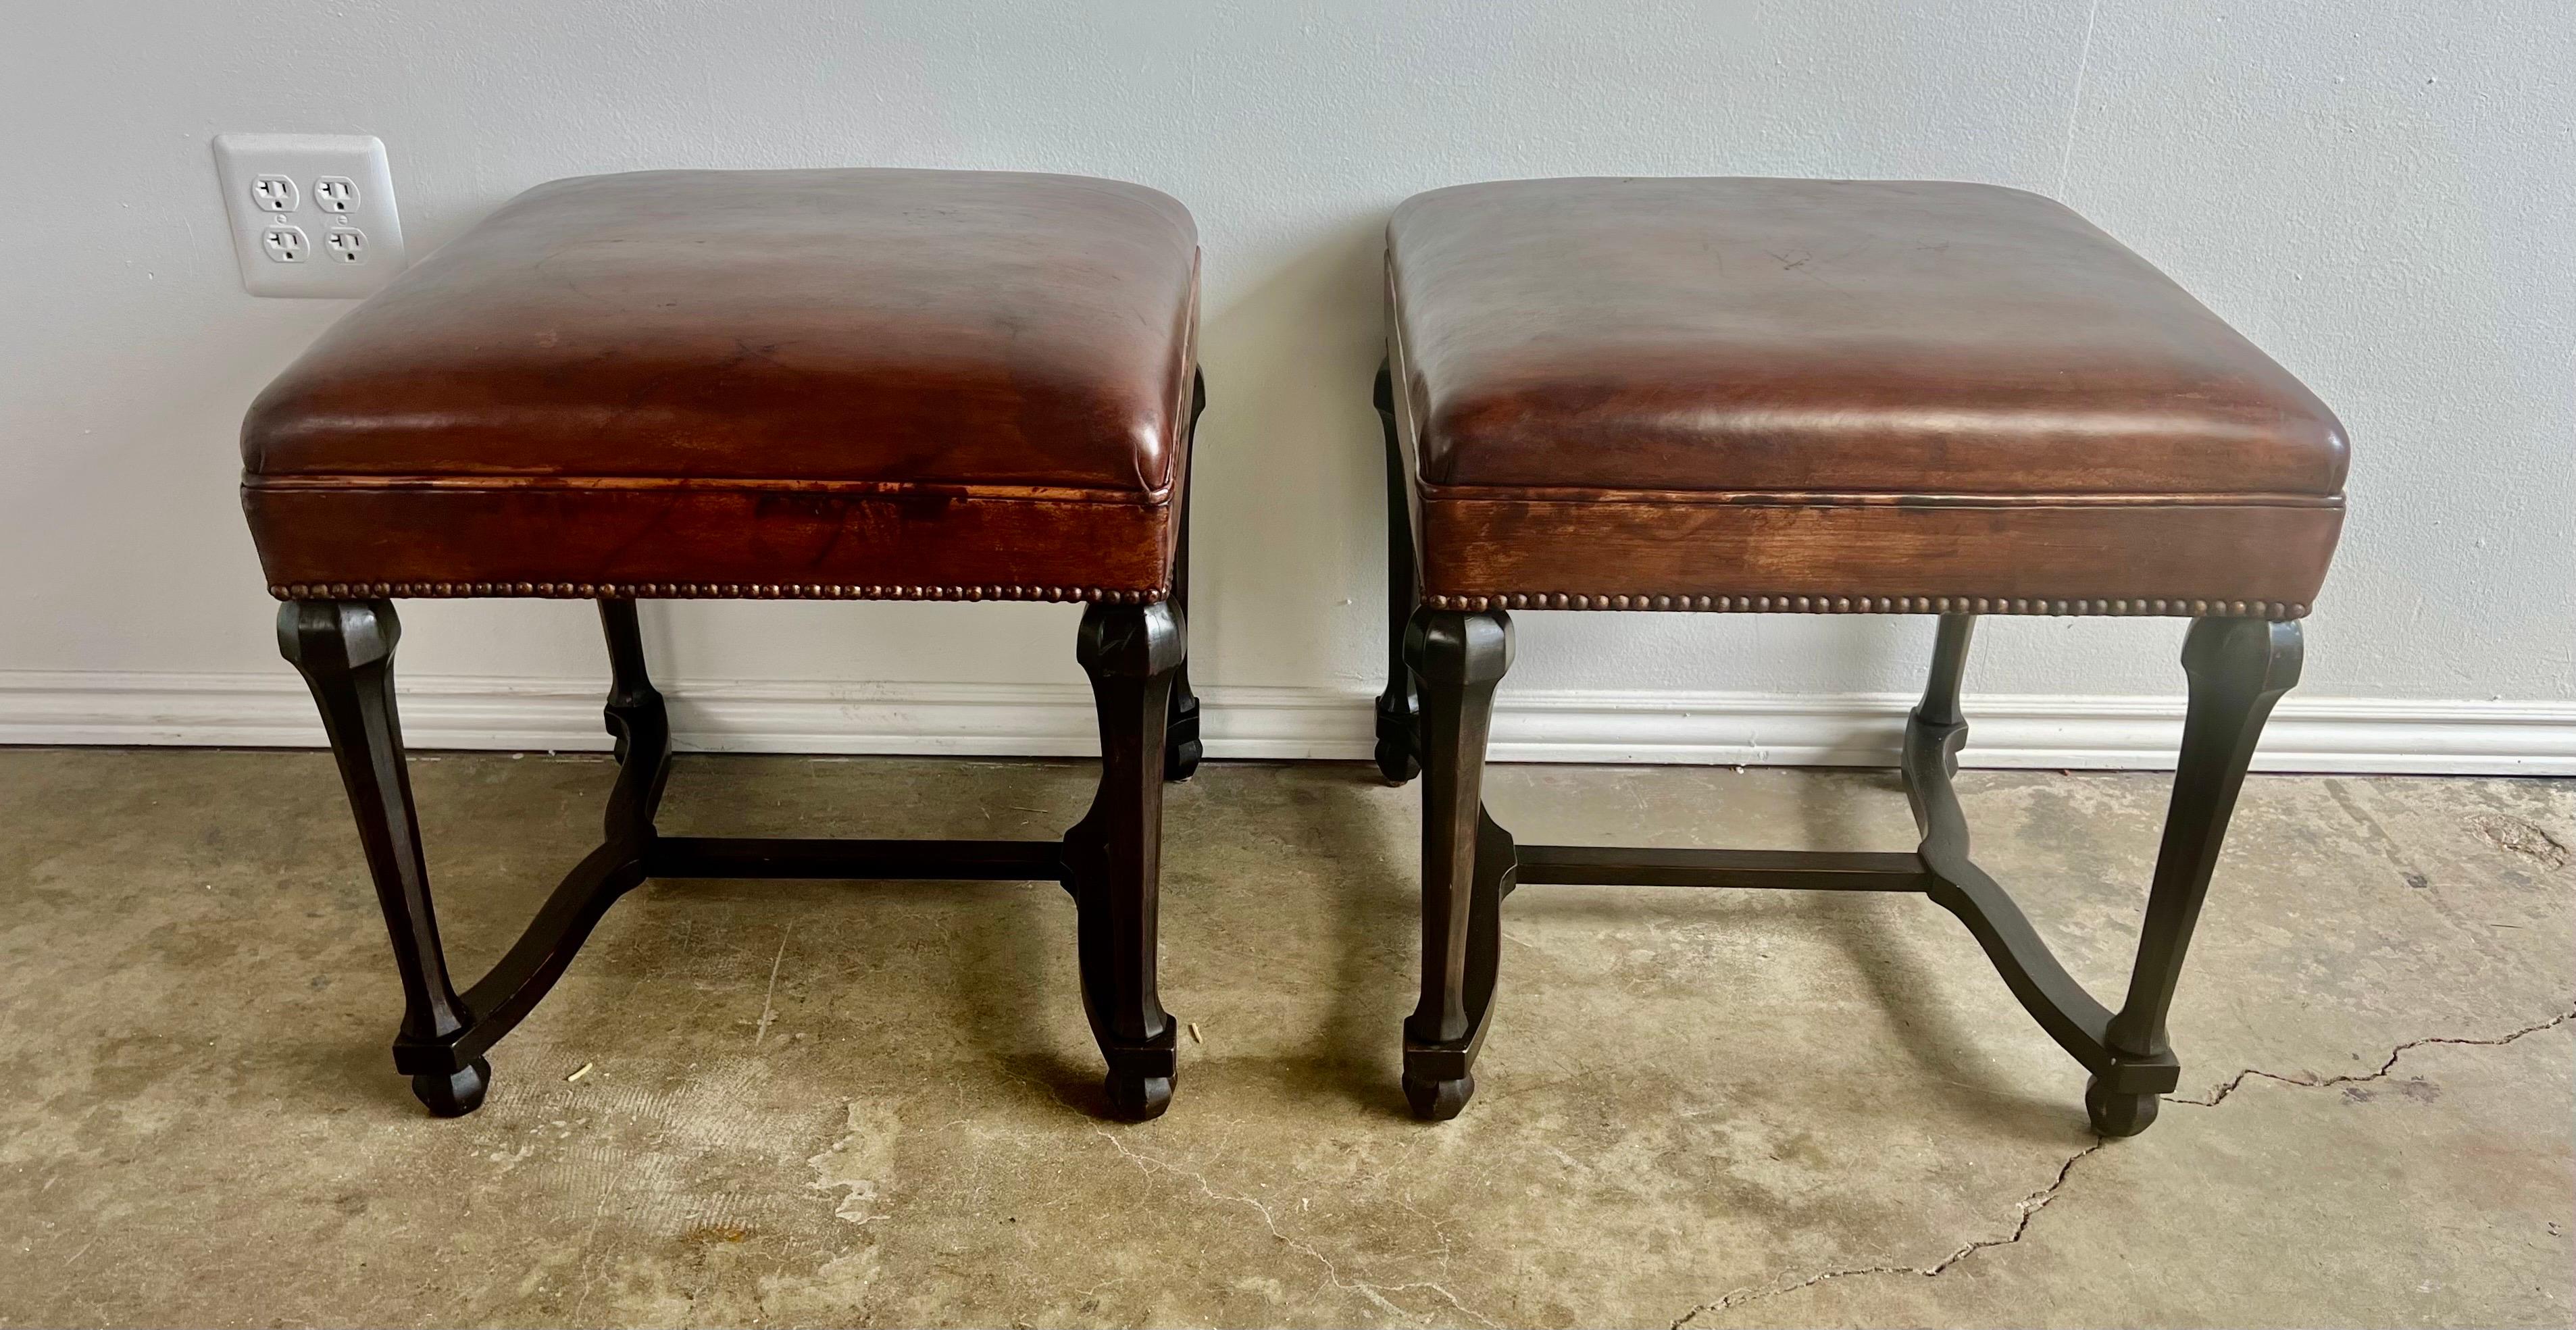 Pair of 19th century English Charles II Style walnut benches with the original leather upholstered seats. Detailed with antique nailhead trim. Soft wear consistent with age and use of benches. The leather has developed a beautiful patina over the